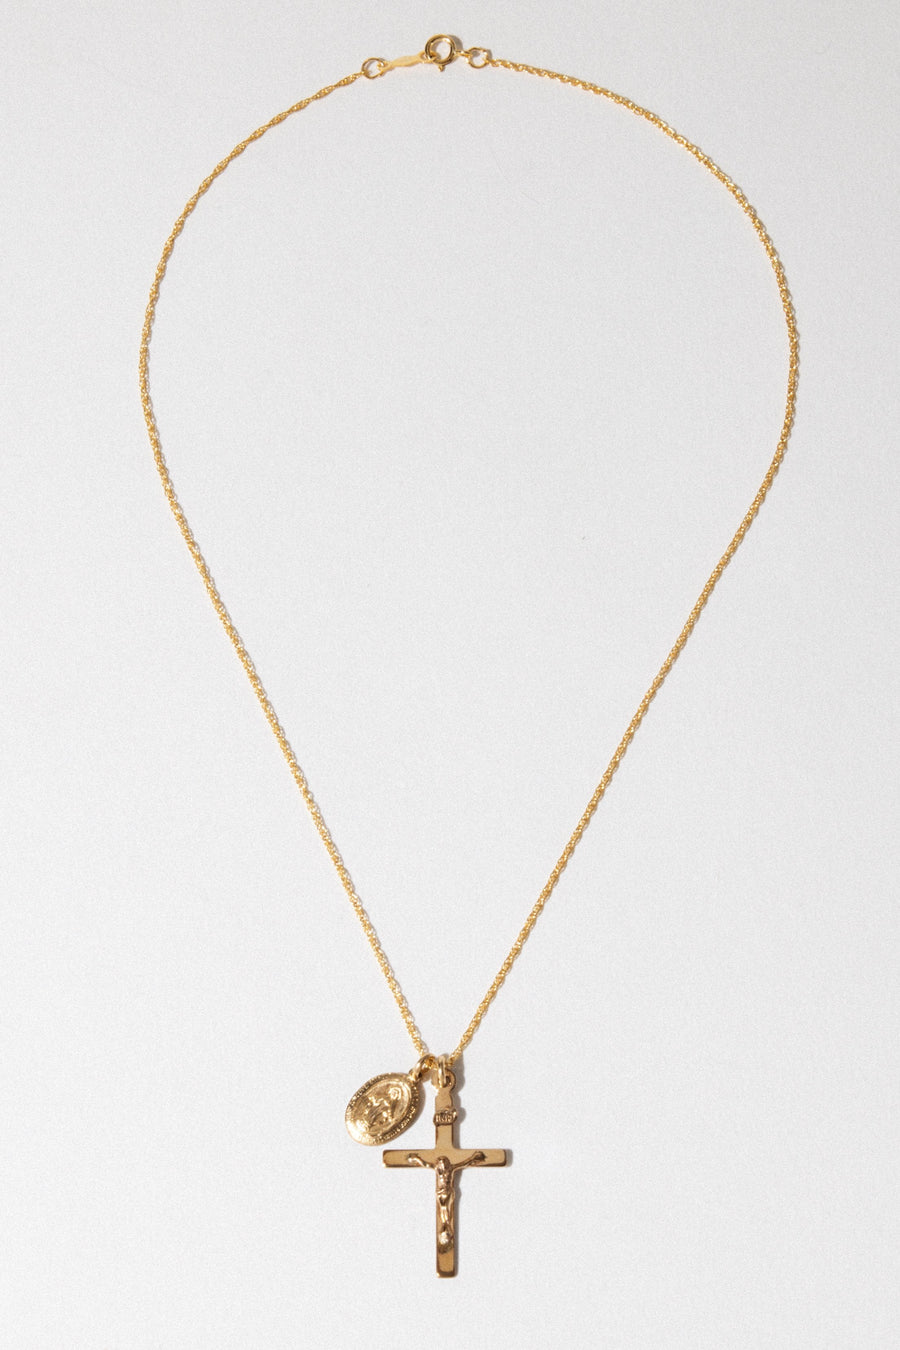 CGM Jewelry Gold / 16 Inches Full of Grace Necklace